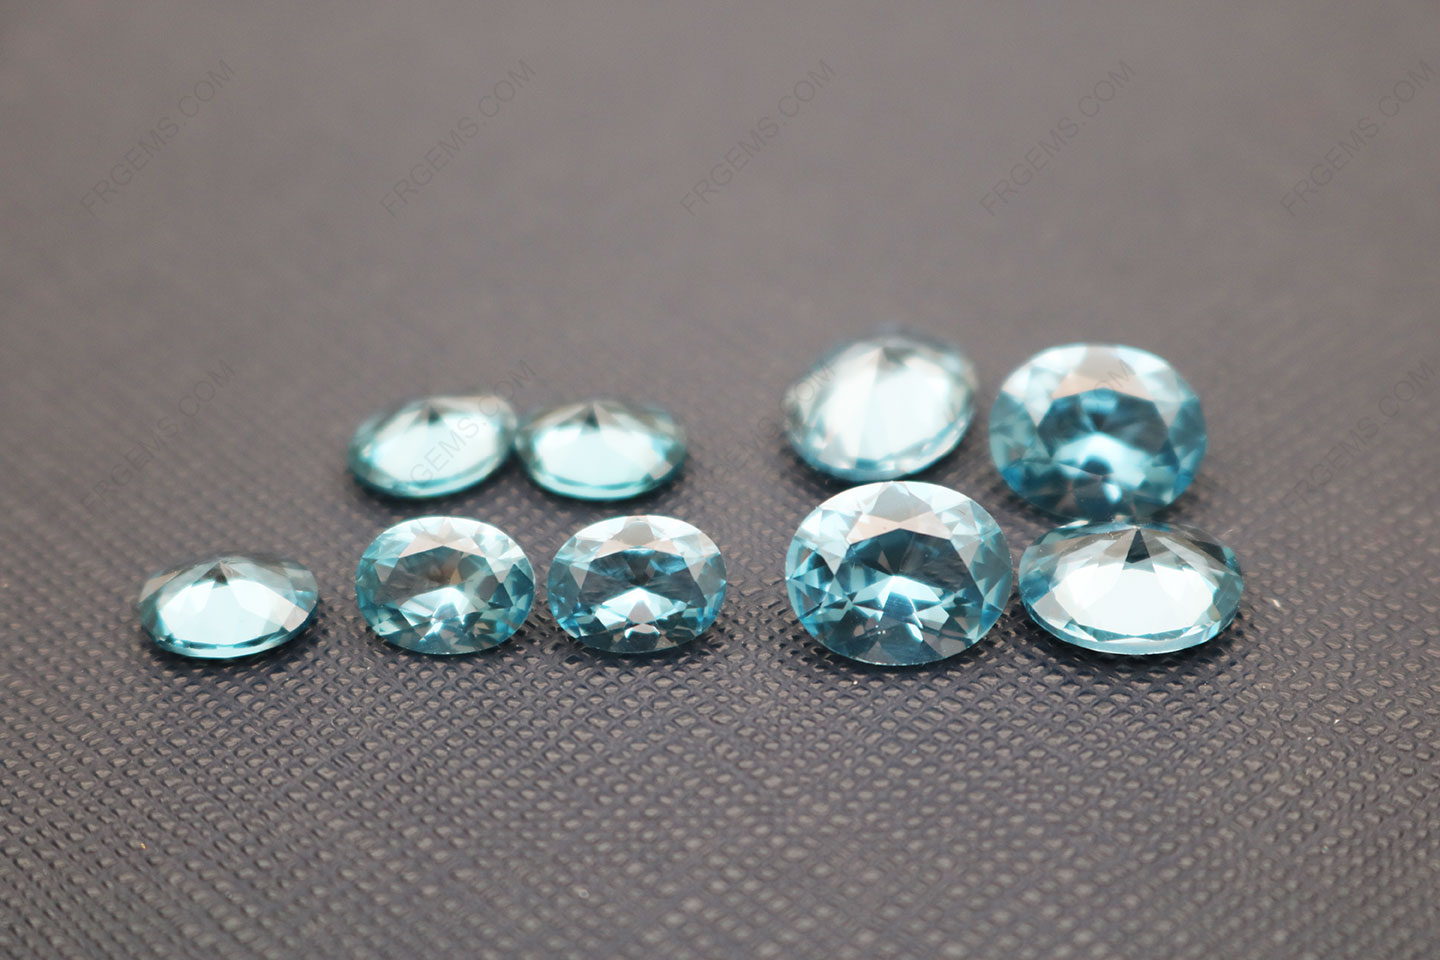 Synthetic Aquamarine Blue Spinel Color #106 Oval Shape Faceted Cut 6x8mm and 8x10mm gemstones